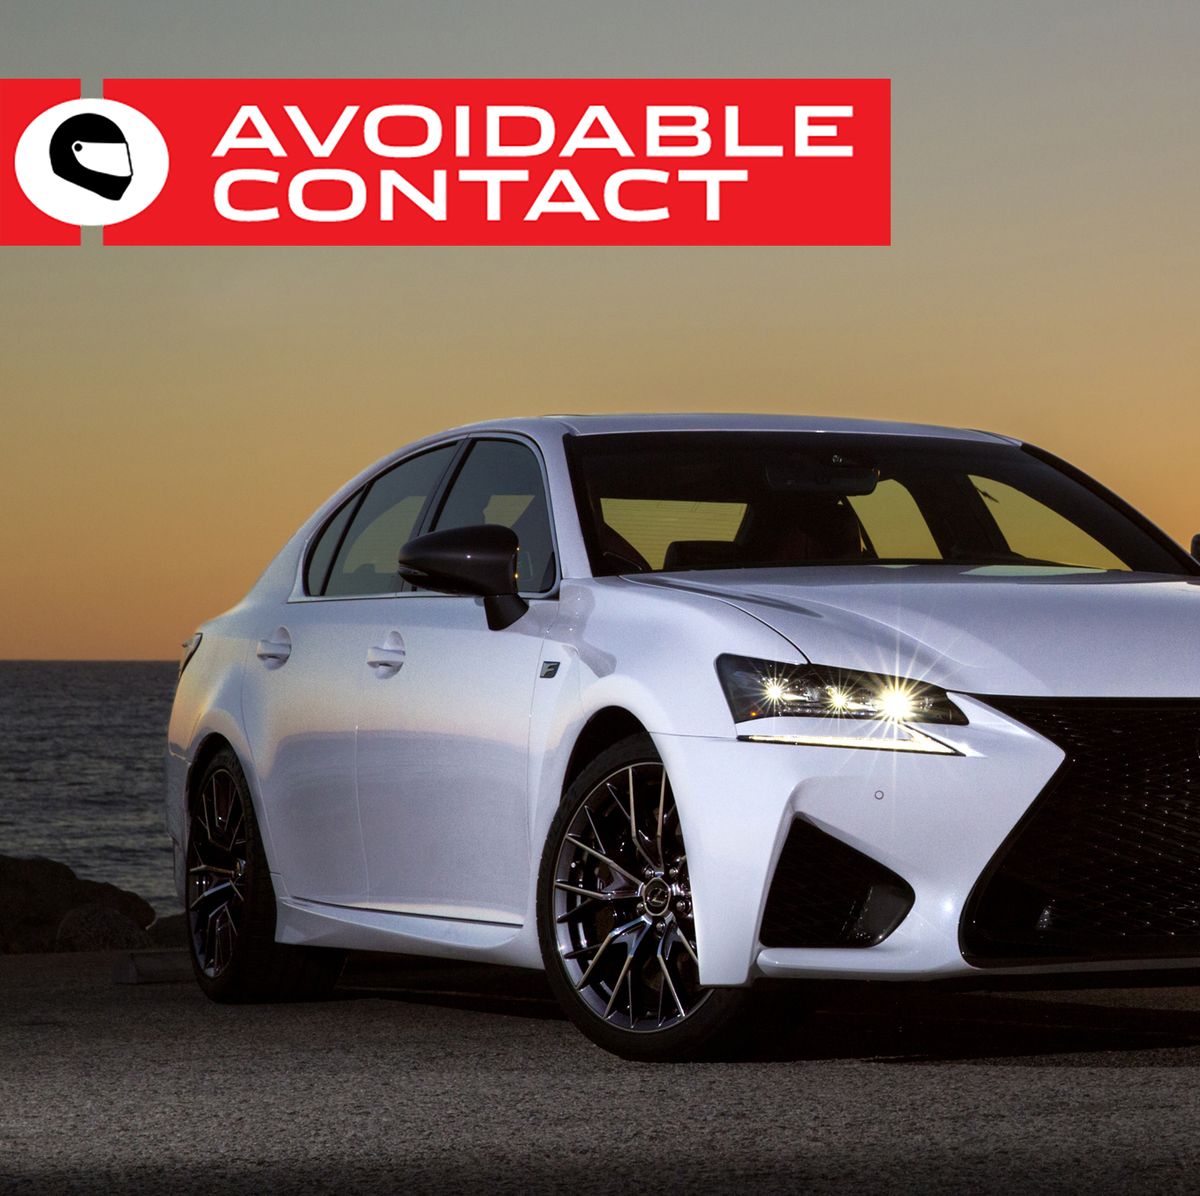 The Lexus GS-F Is the Future Classic Nobody Is Talking About